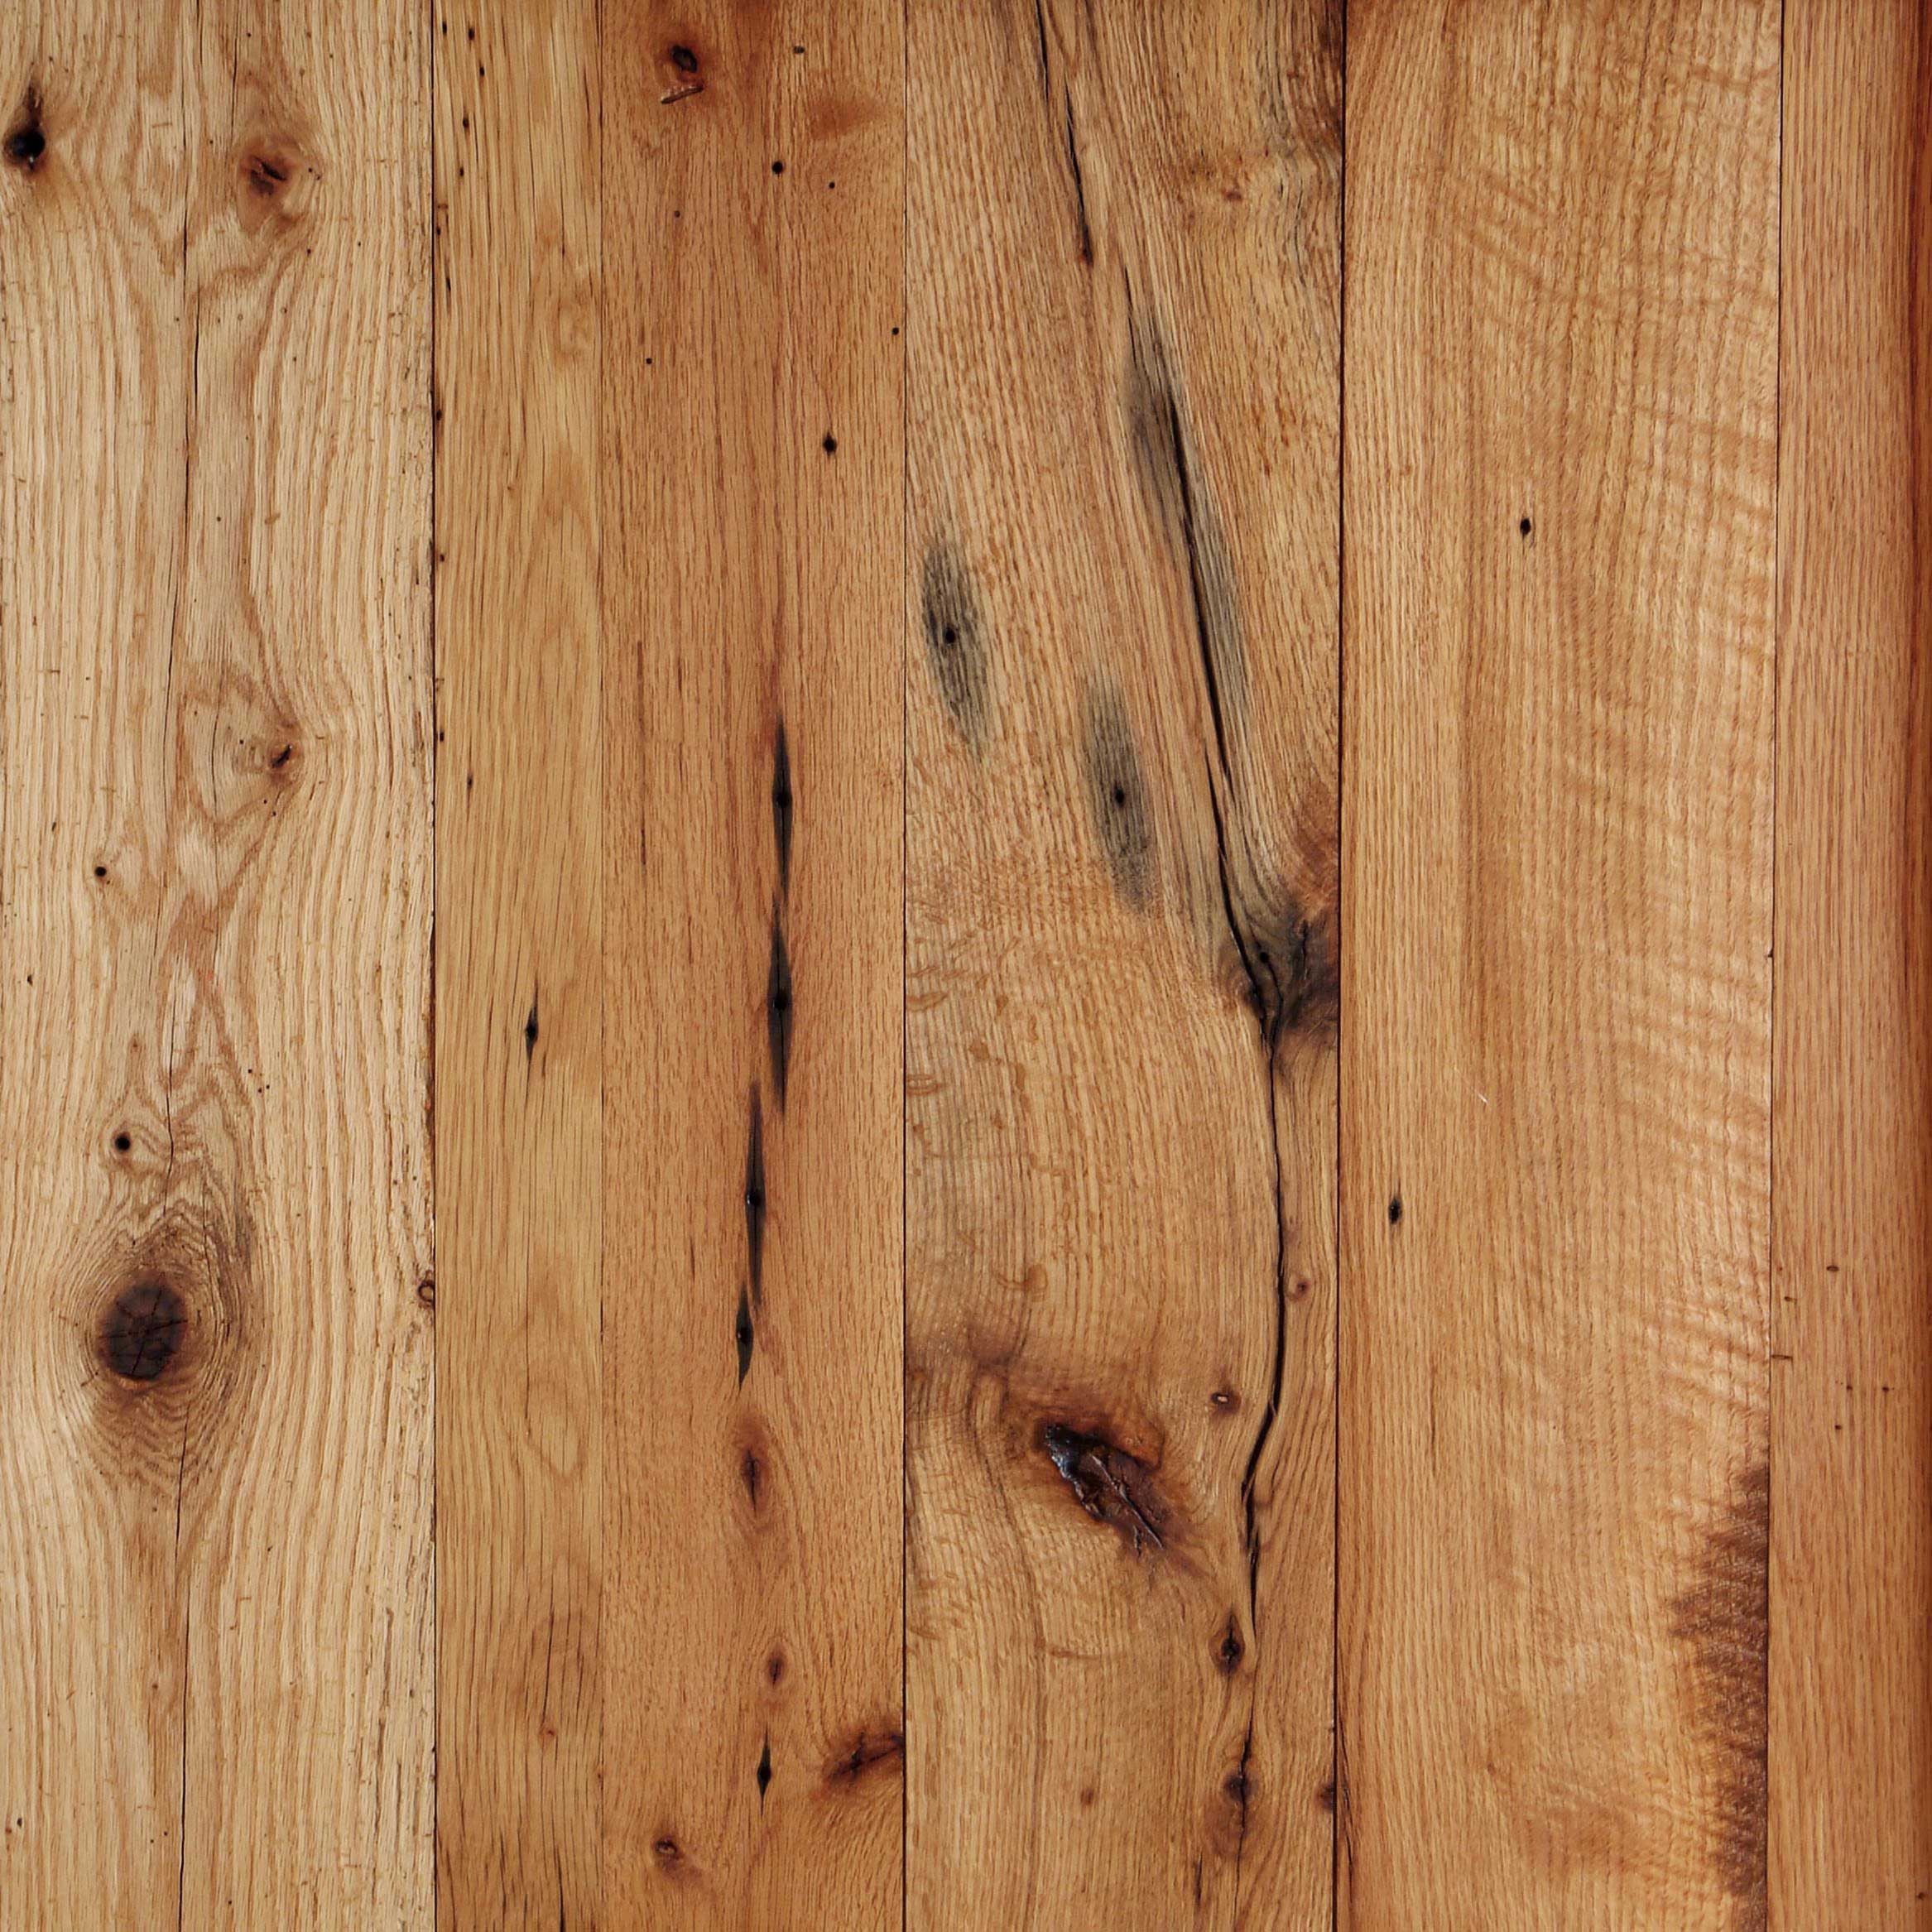 20 Ideal 4 Inch Oak Hardwood Flooring 2024 free download 4 inch oak hardwood flooring of longleaf lumber reclaimed red white oak wood throughout reclaimed salvaged antique red oak flooring wide boards knots